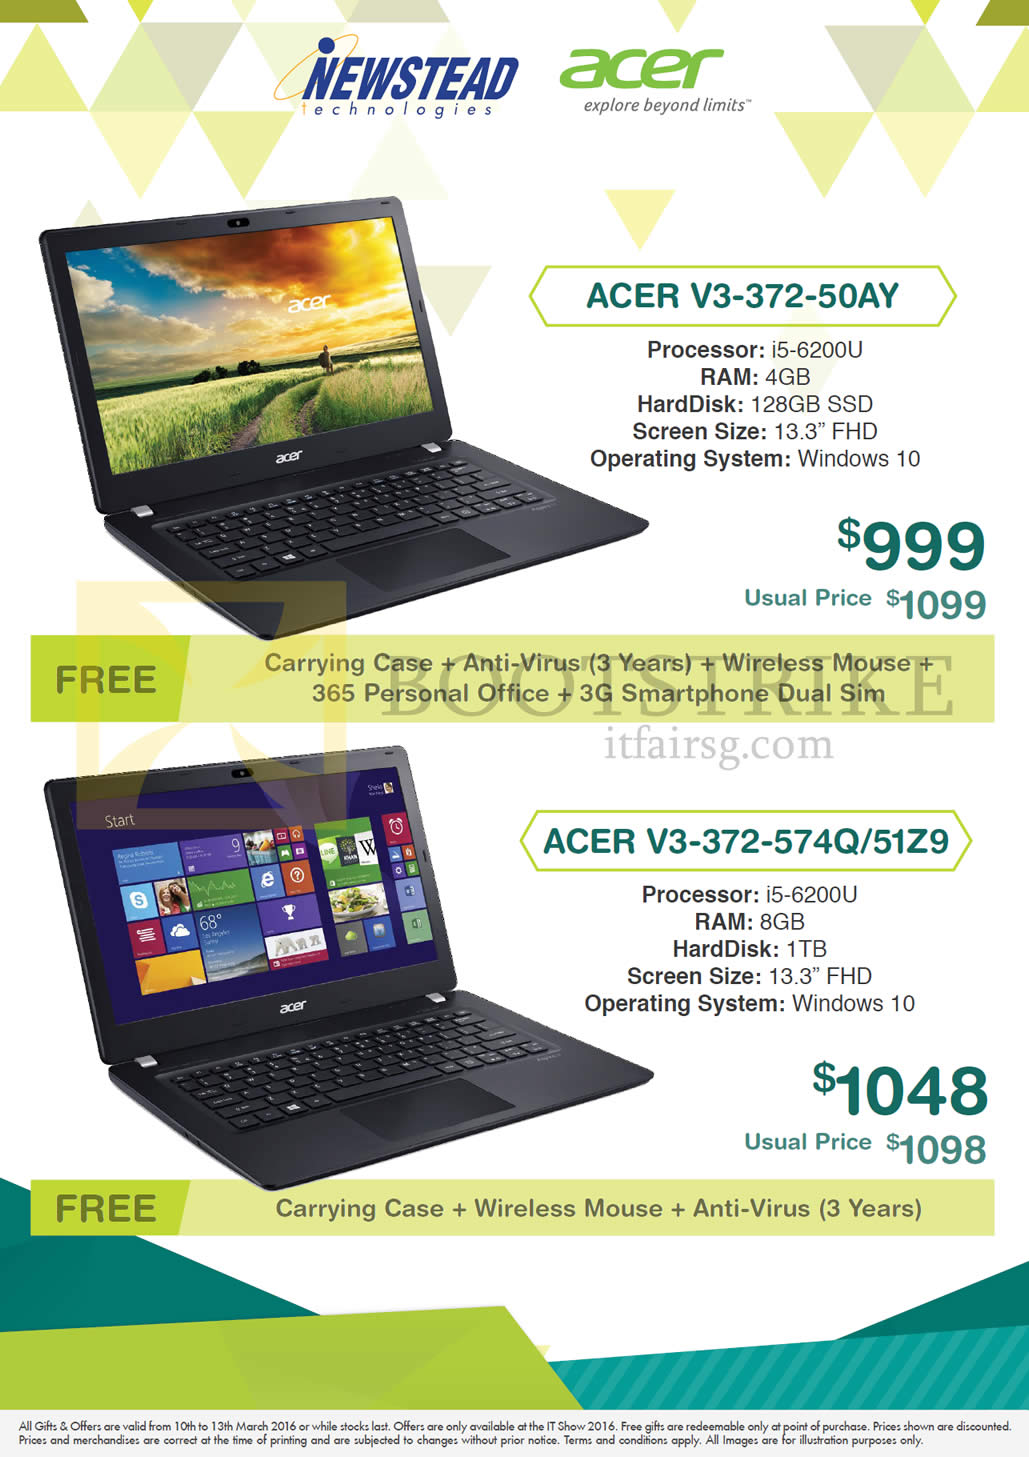 IT SHOW 2016 price list image brochure of Acer Newstead Notebooks V3-372-50AY, V3-372-574Q, 51Z9